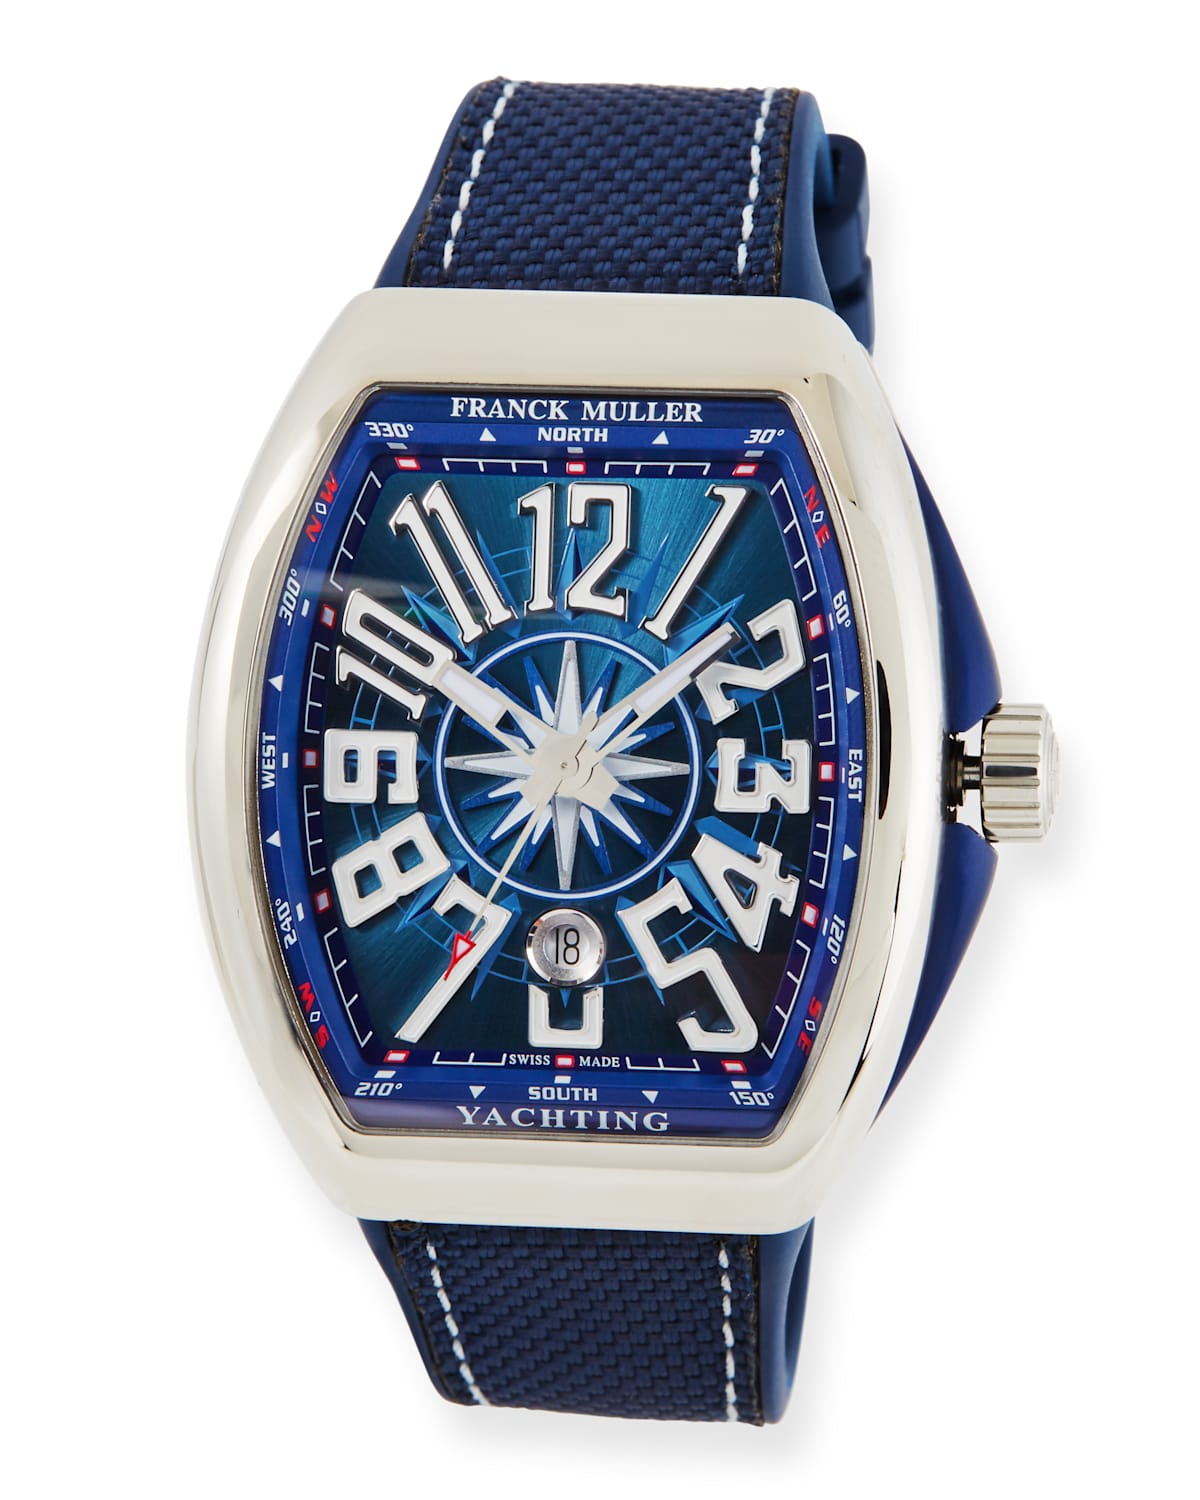 Vanguard Yachting Watch with Blue Carbon Fiber Strap